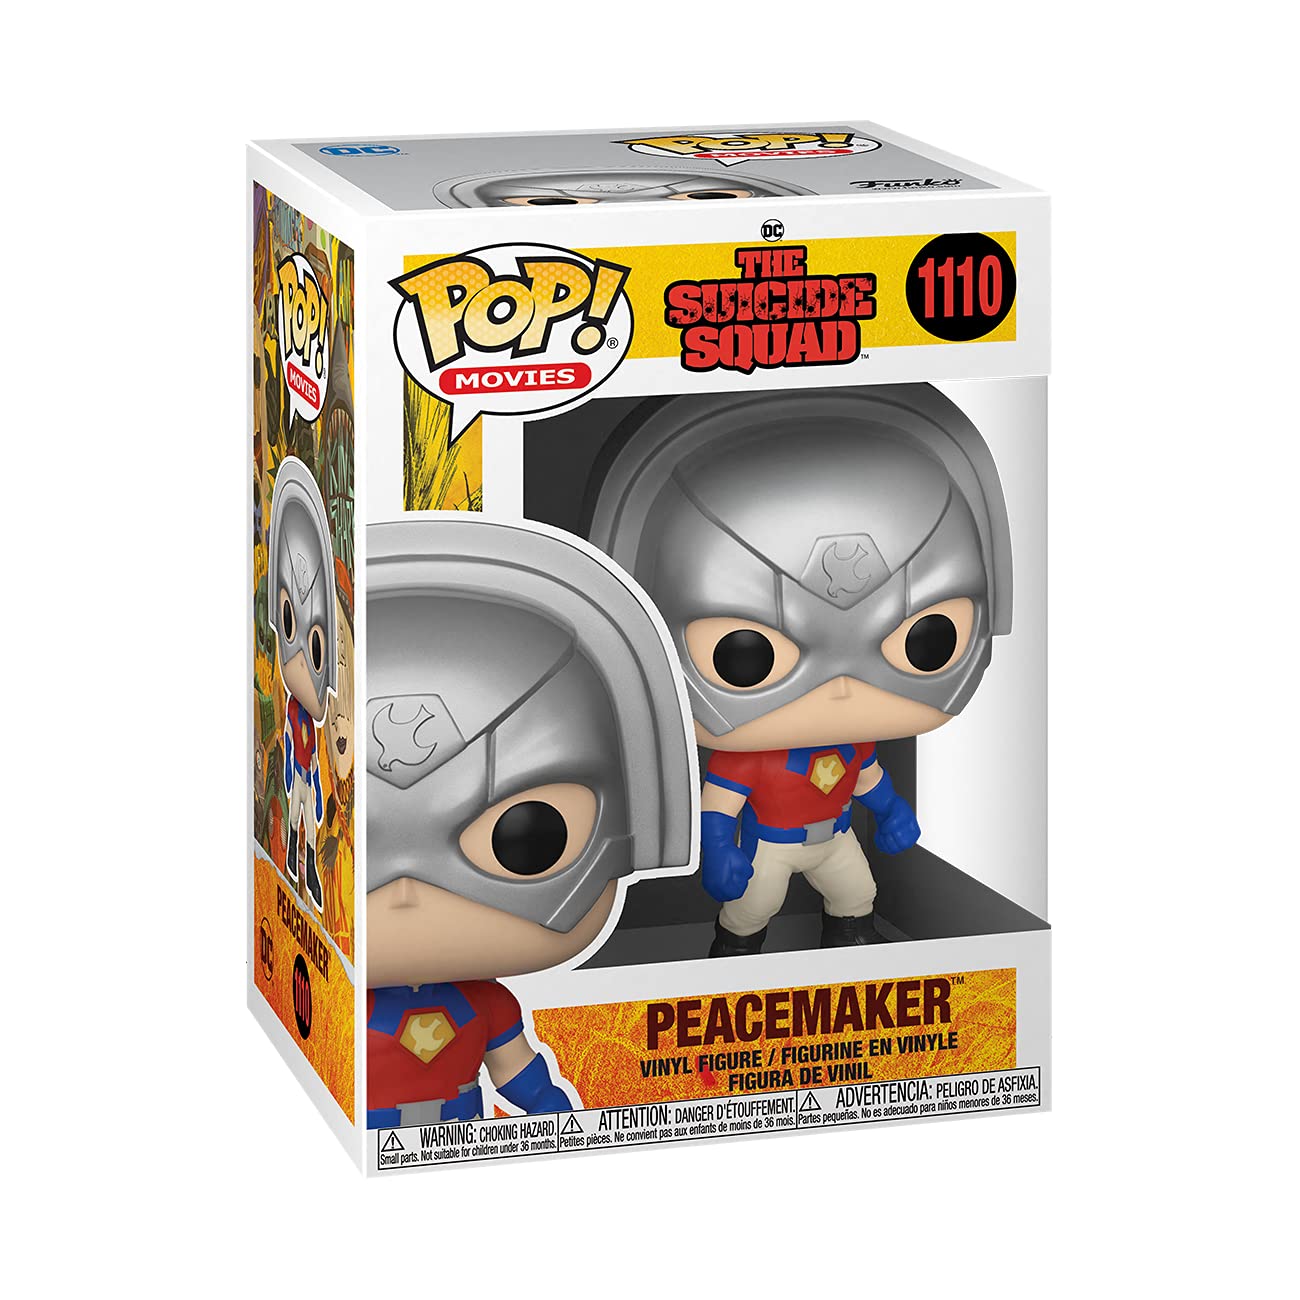 Funko Pop! Movies: The Suicide Squad - Peacemaker